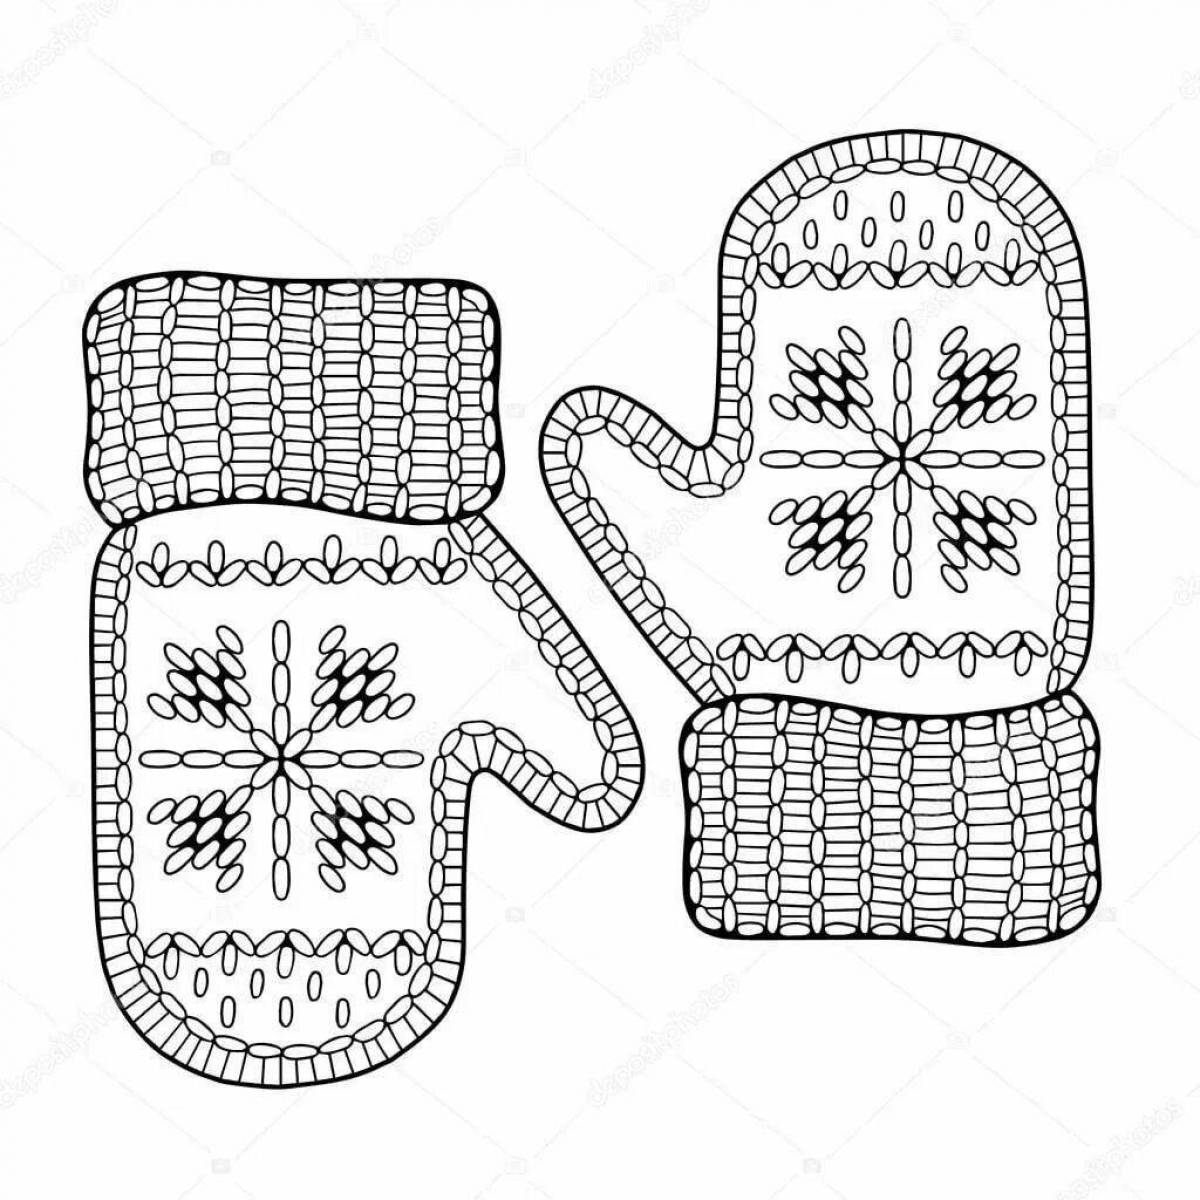 Santa Glowing Mitten Coloring Page for Juniors